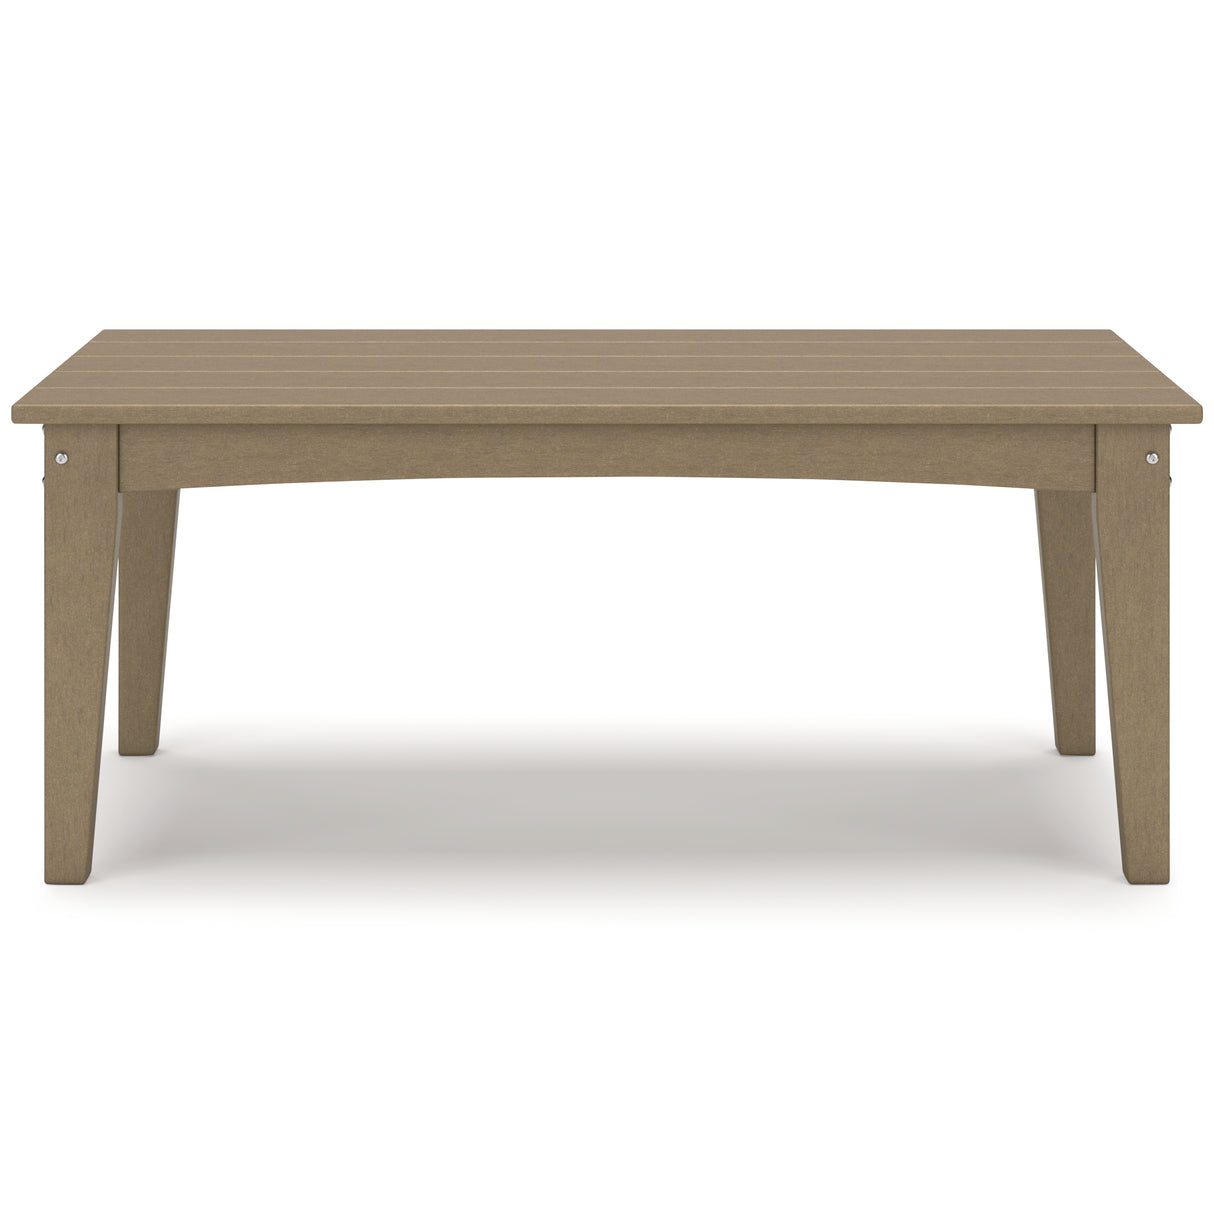 Hyland Wave Driftwood Outdoor Coffee Table